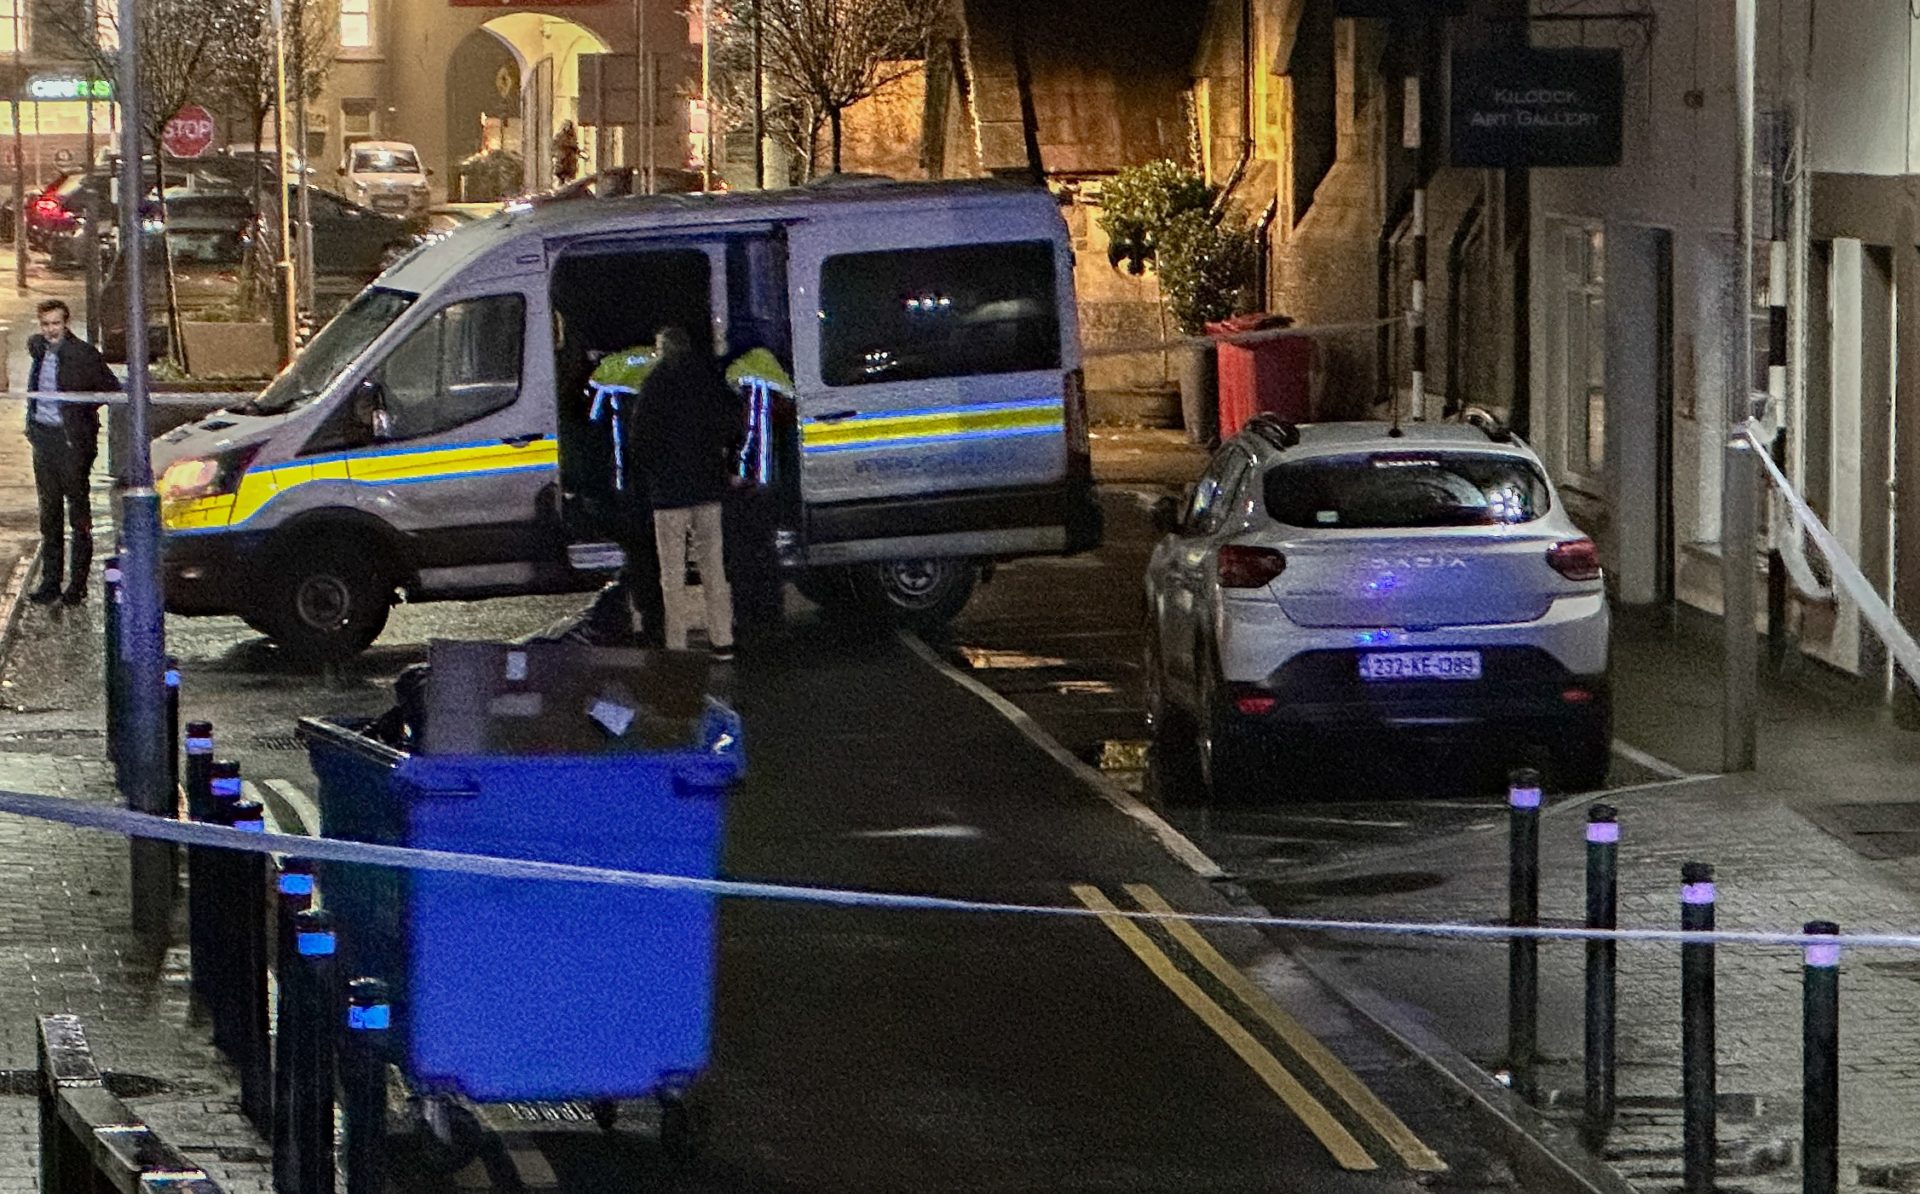 Gardaí at the scene of a fatal incident on School Street, Kilcock in County Kildare, 8-2-24.